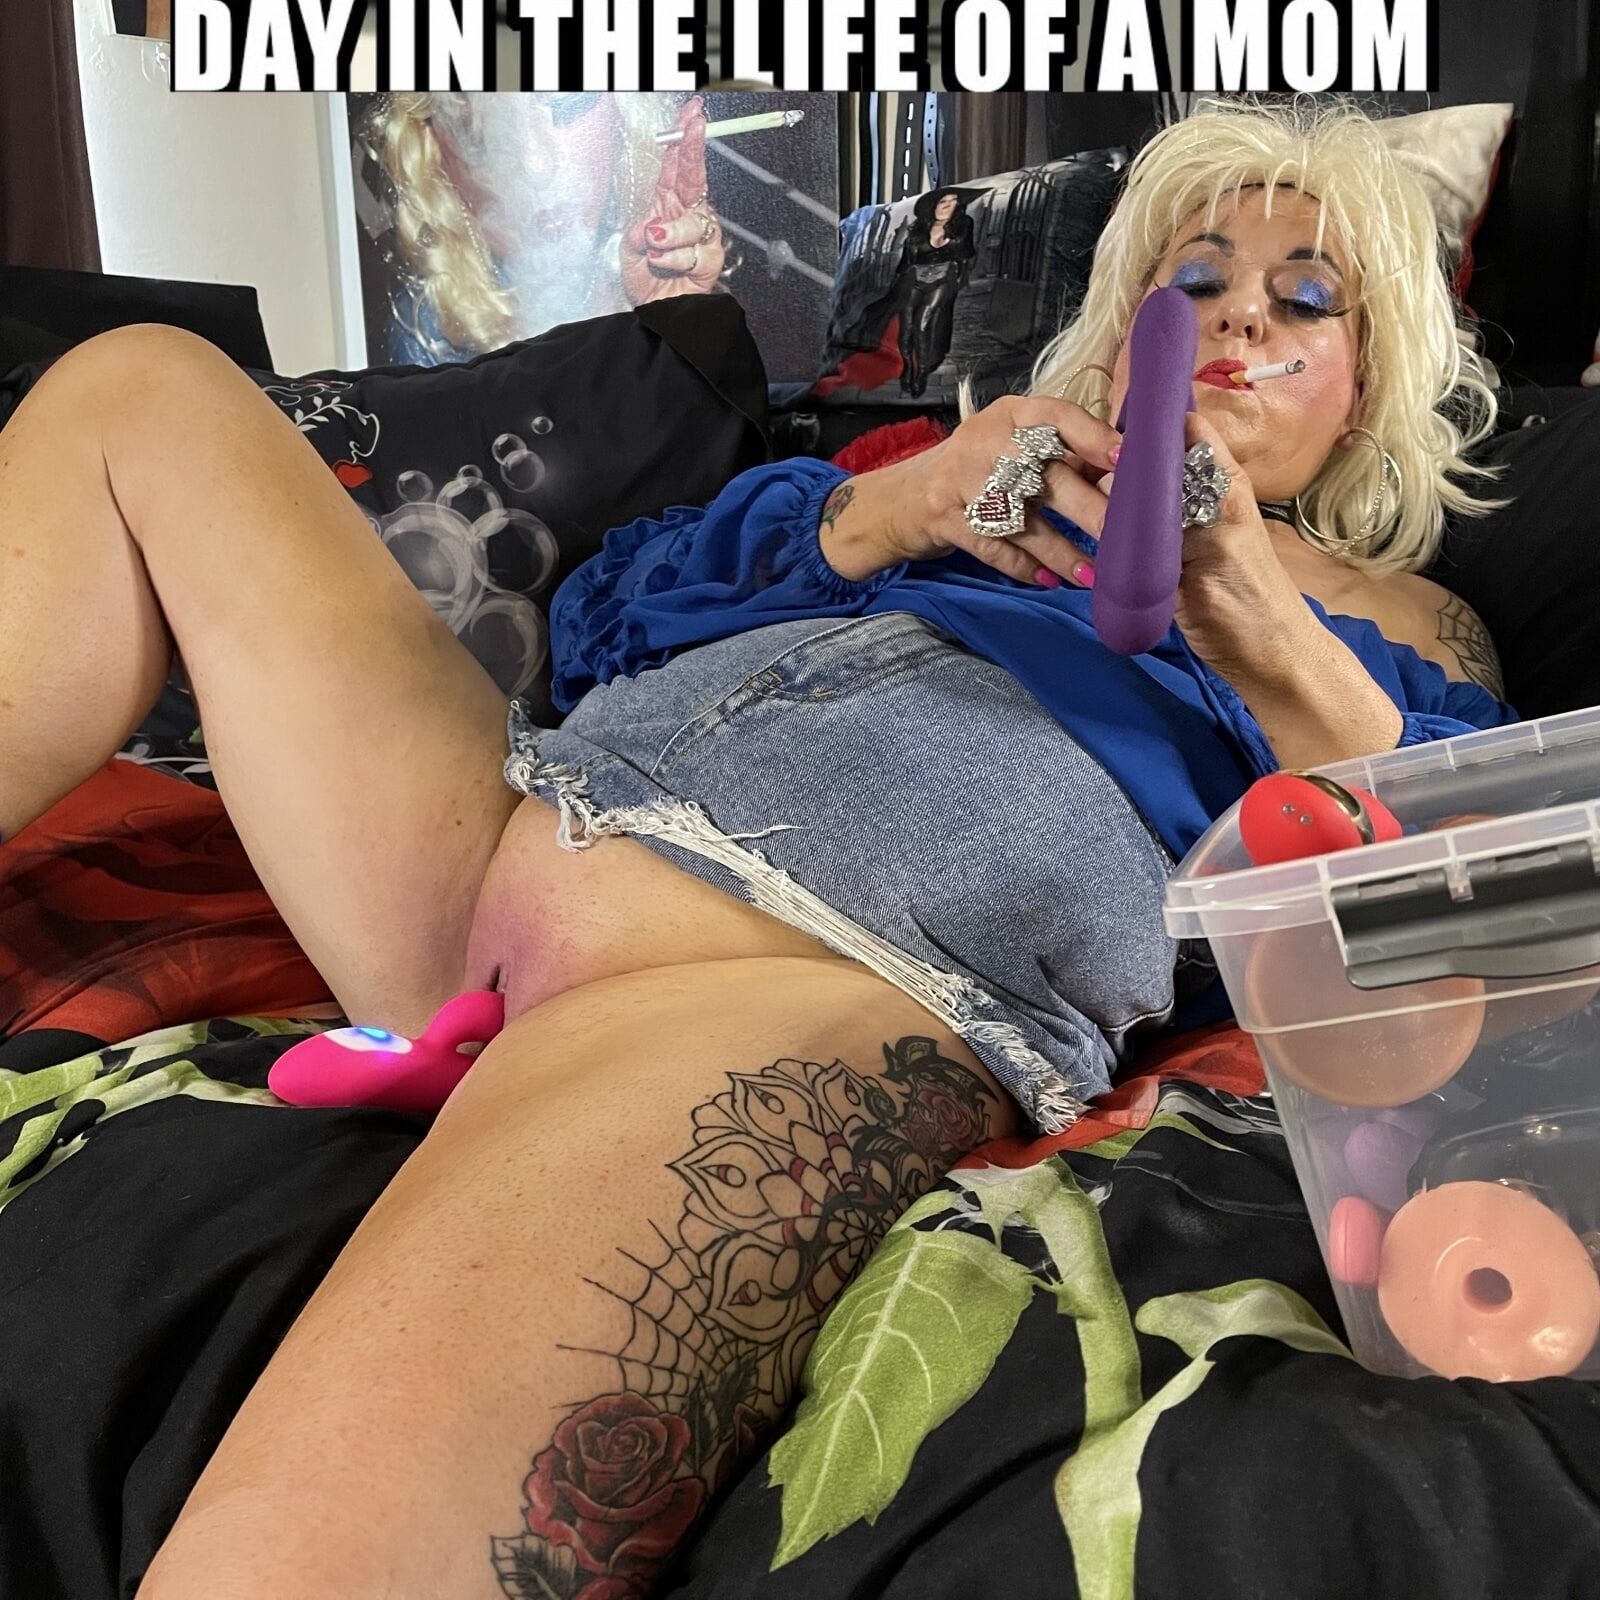 SHIRLEY THE LIFE OF A MOM